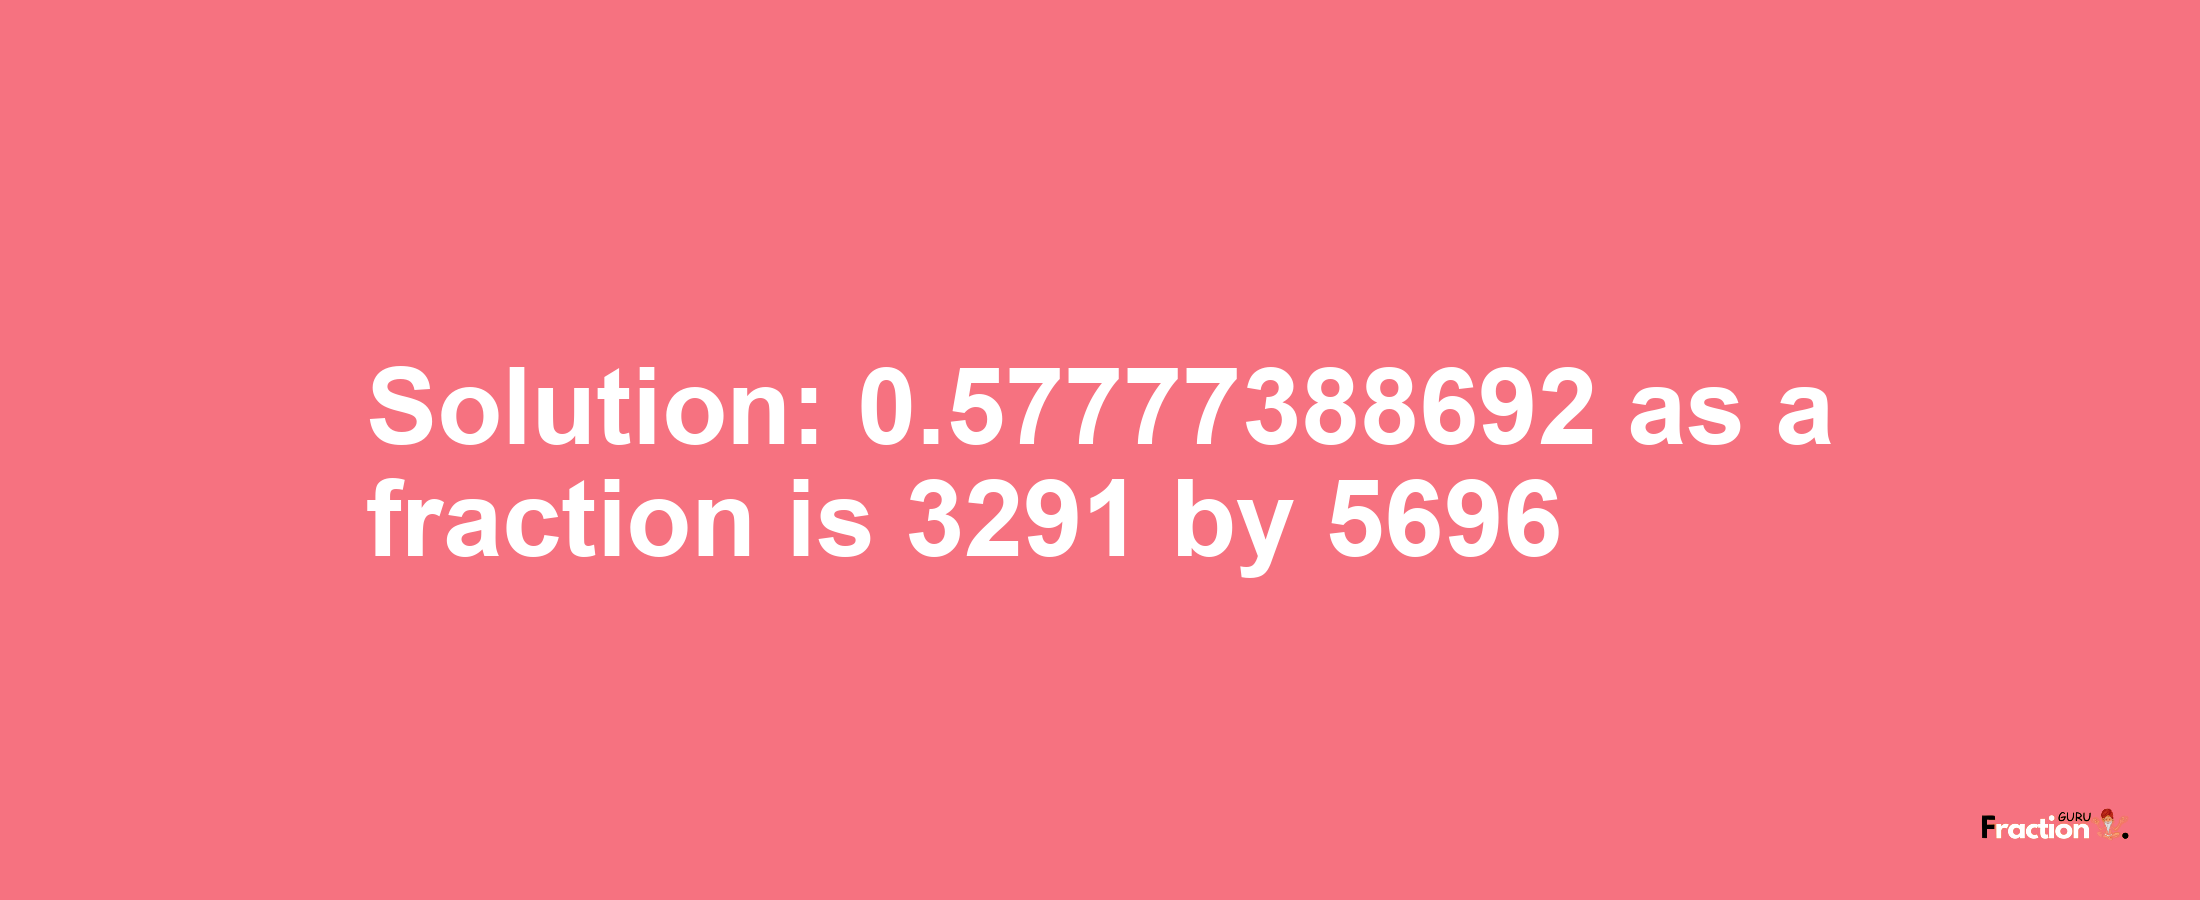 Solution:0.57777388692 as a fraction is 3291/5696